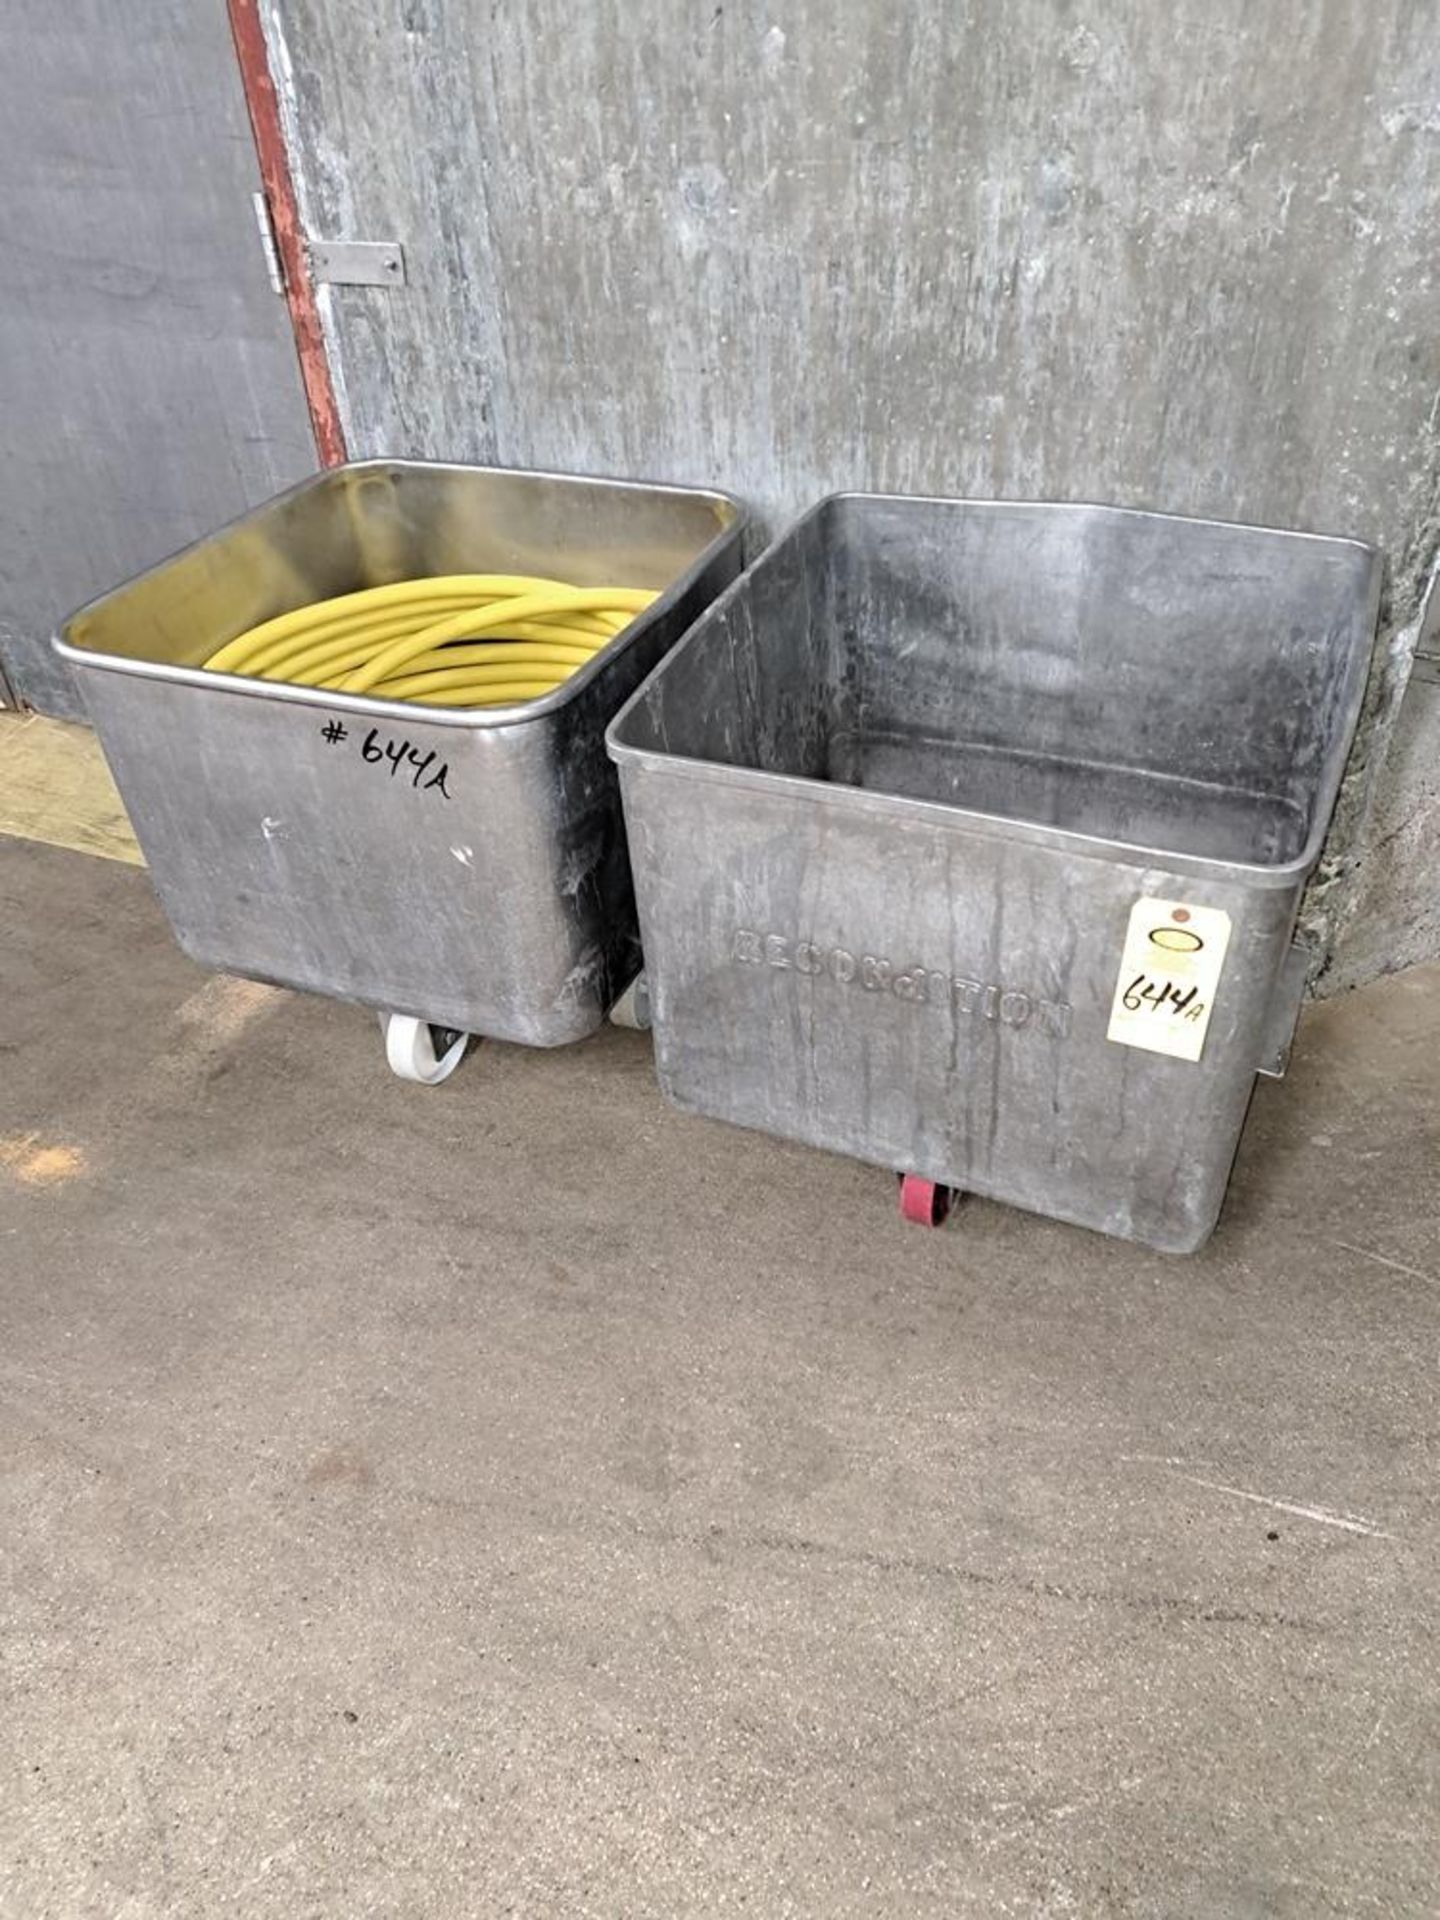 Stainless Steel Dump Buggies, 400 Lb. capacity: Required Loading Fee $75.00, Rigger-Norm Pavlish,